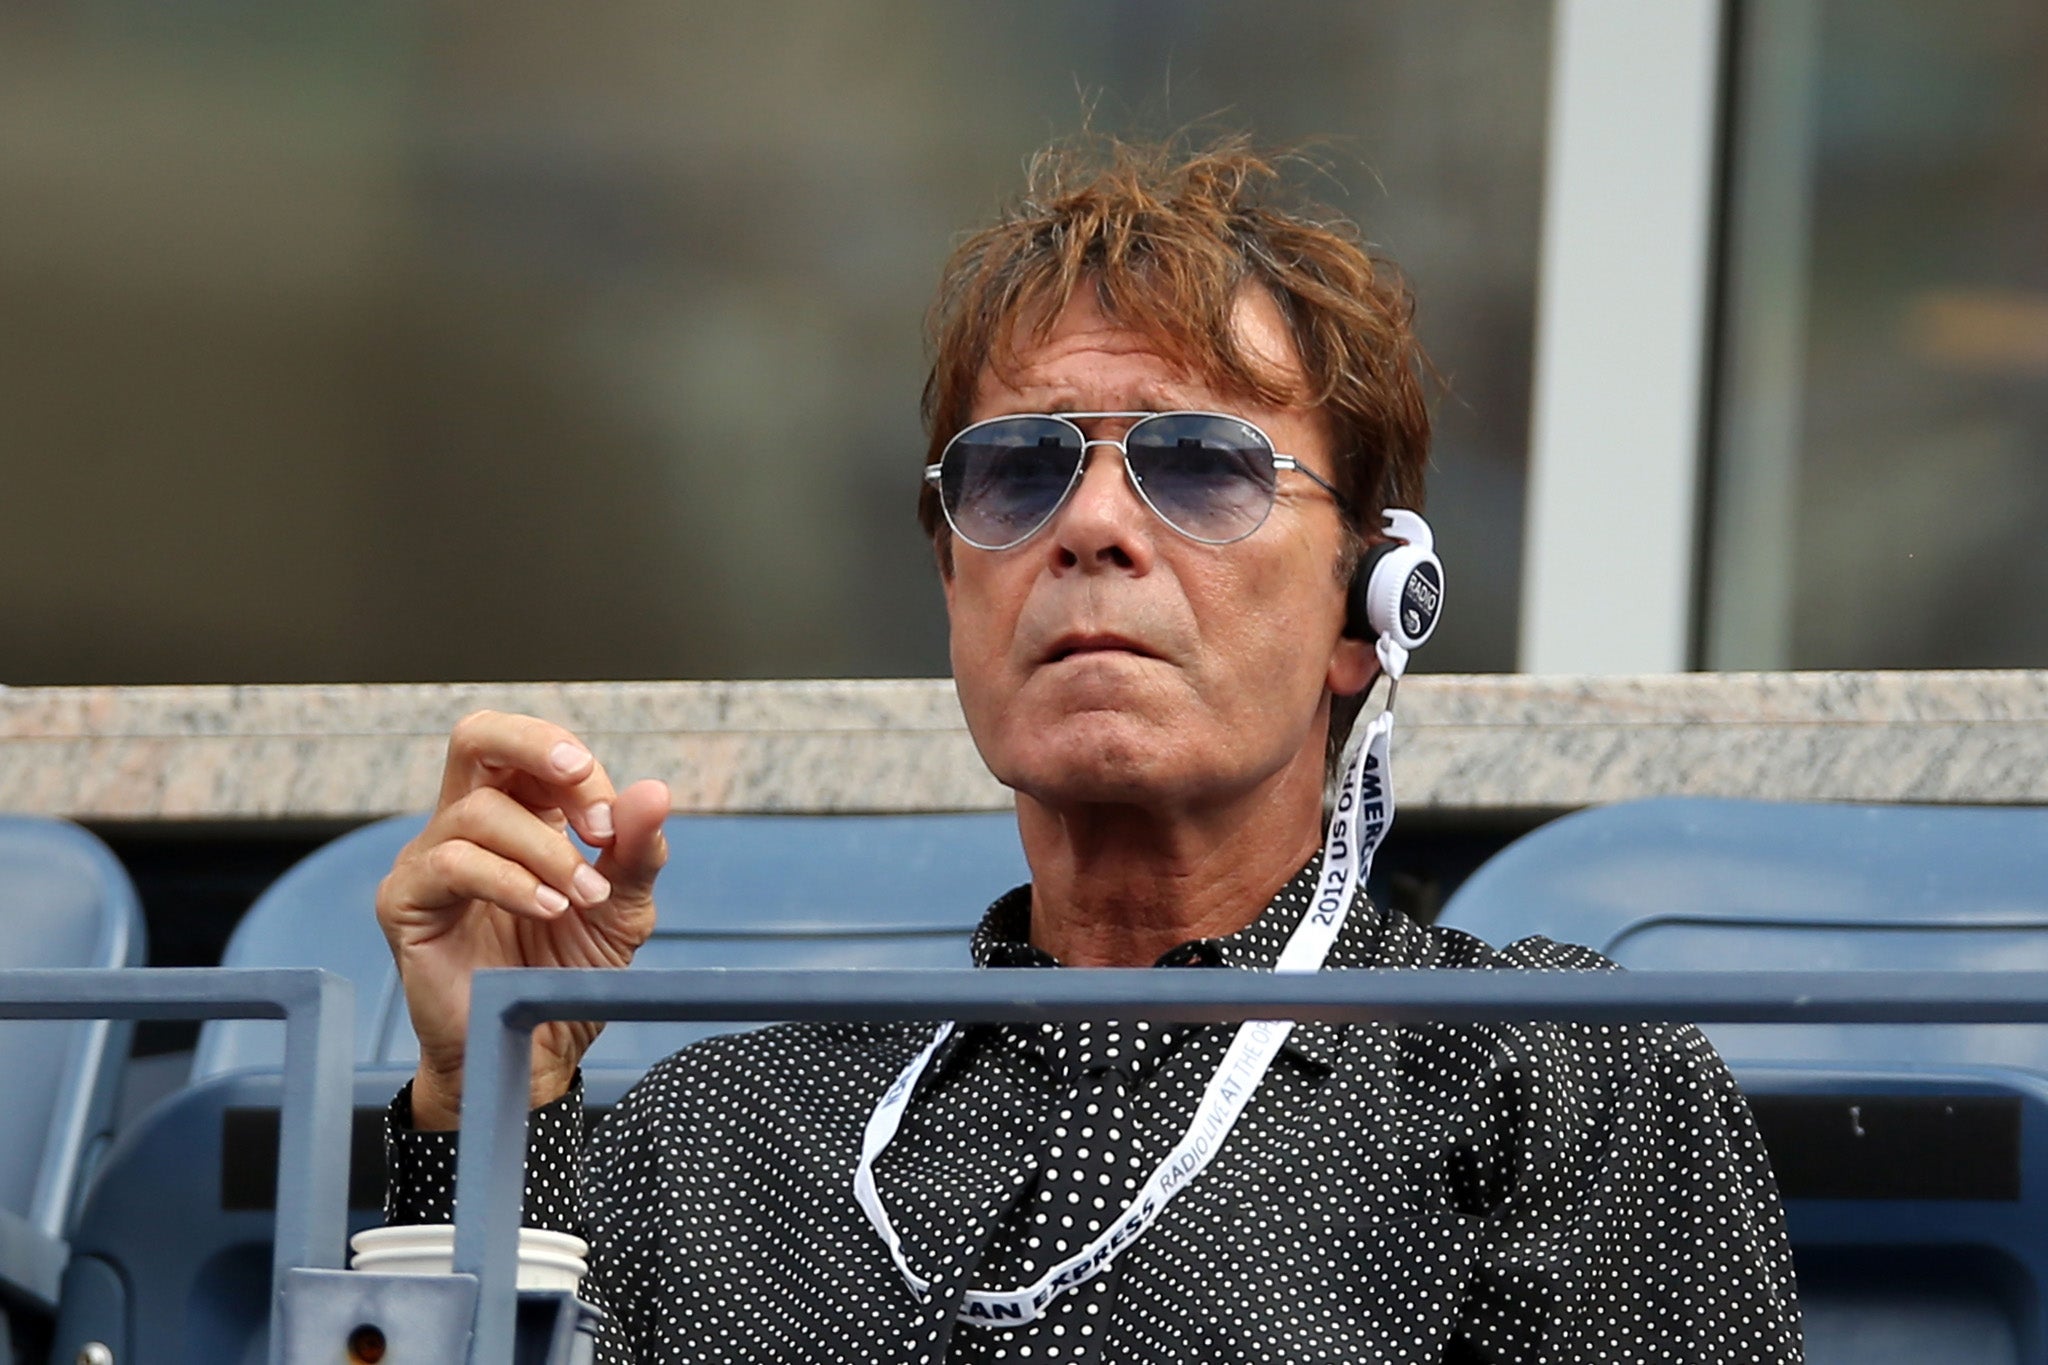 Sir Cliff Richard at the 2012 US Open. The crooner claimed One Direction still compete with him to 'look cool'